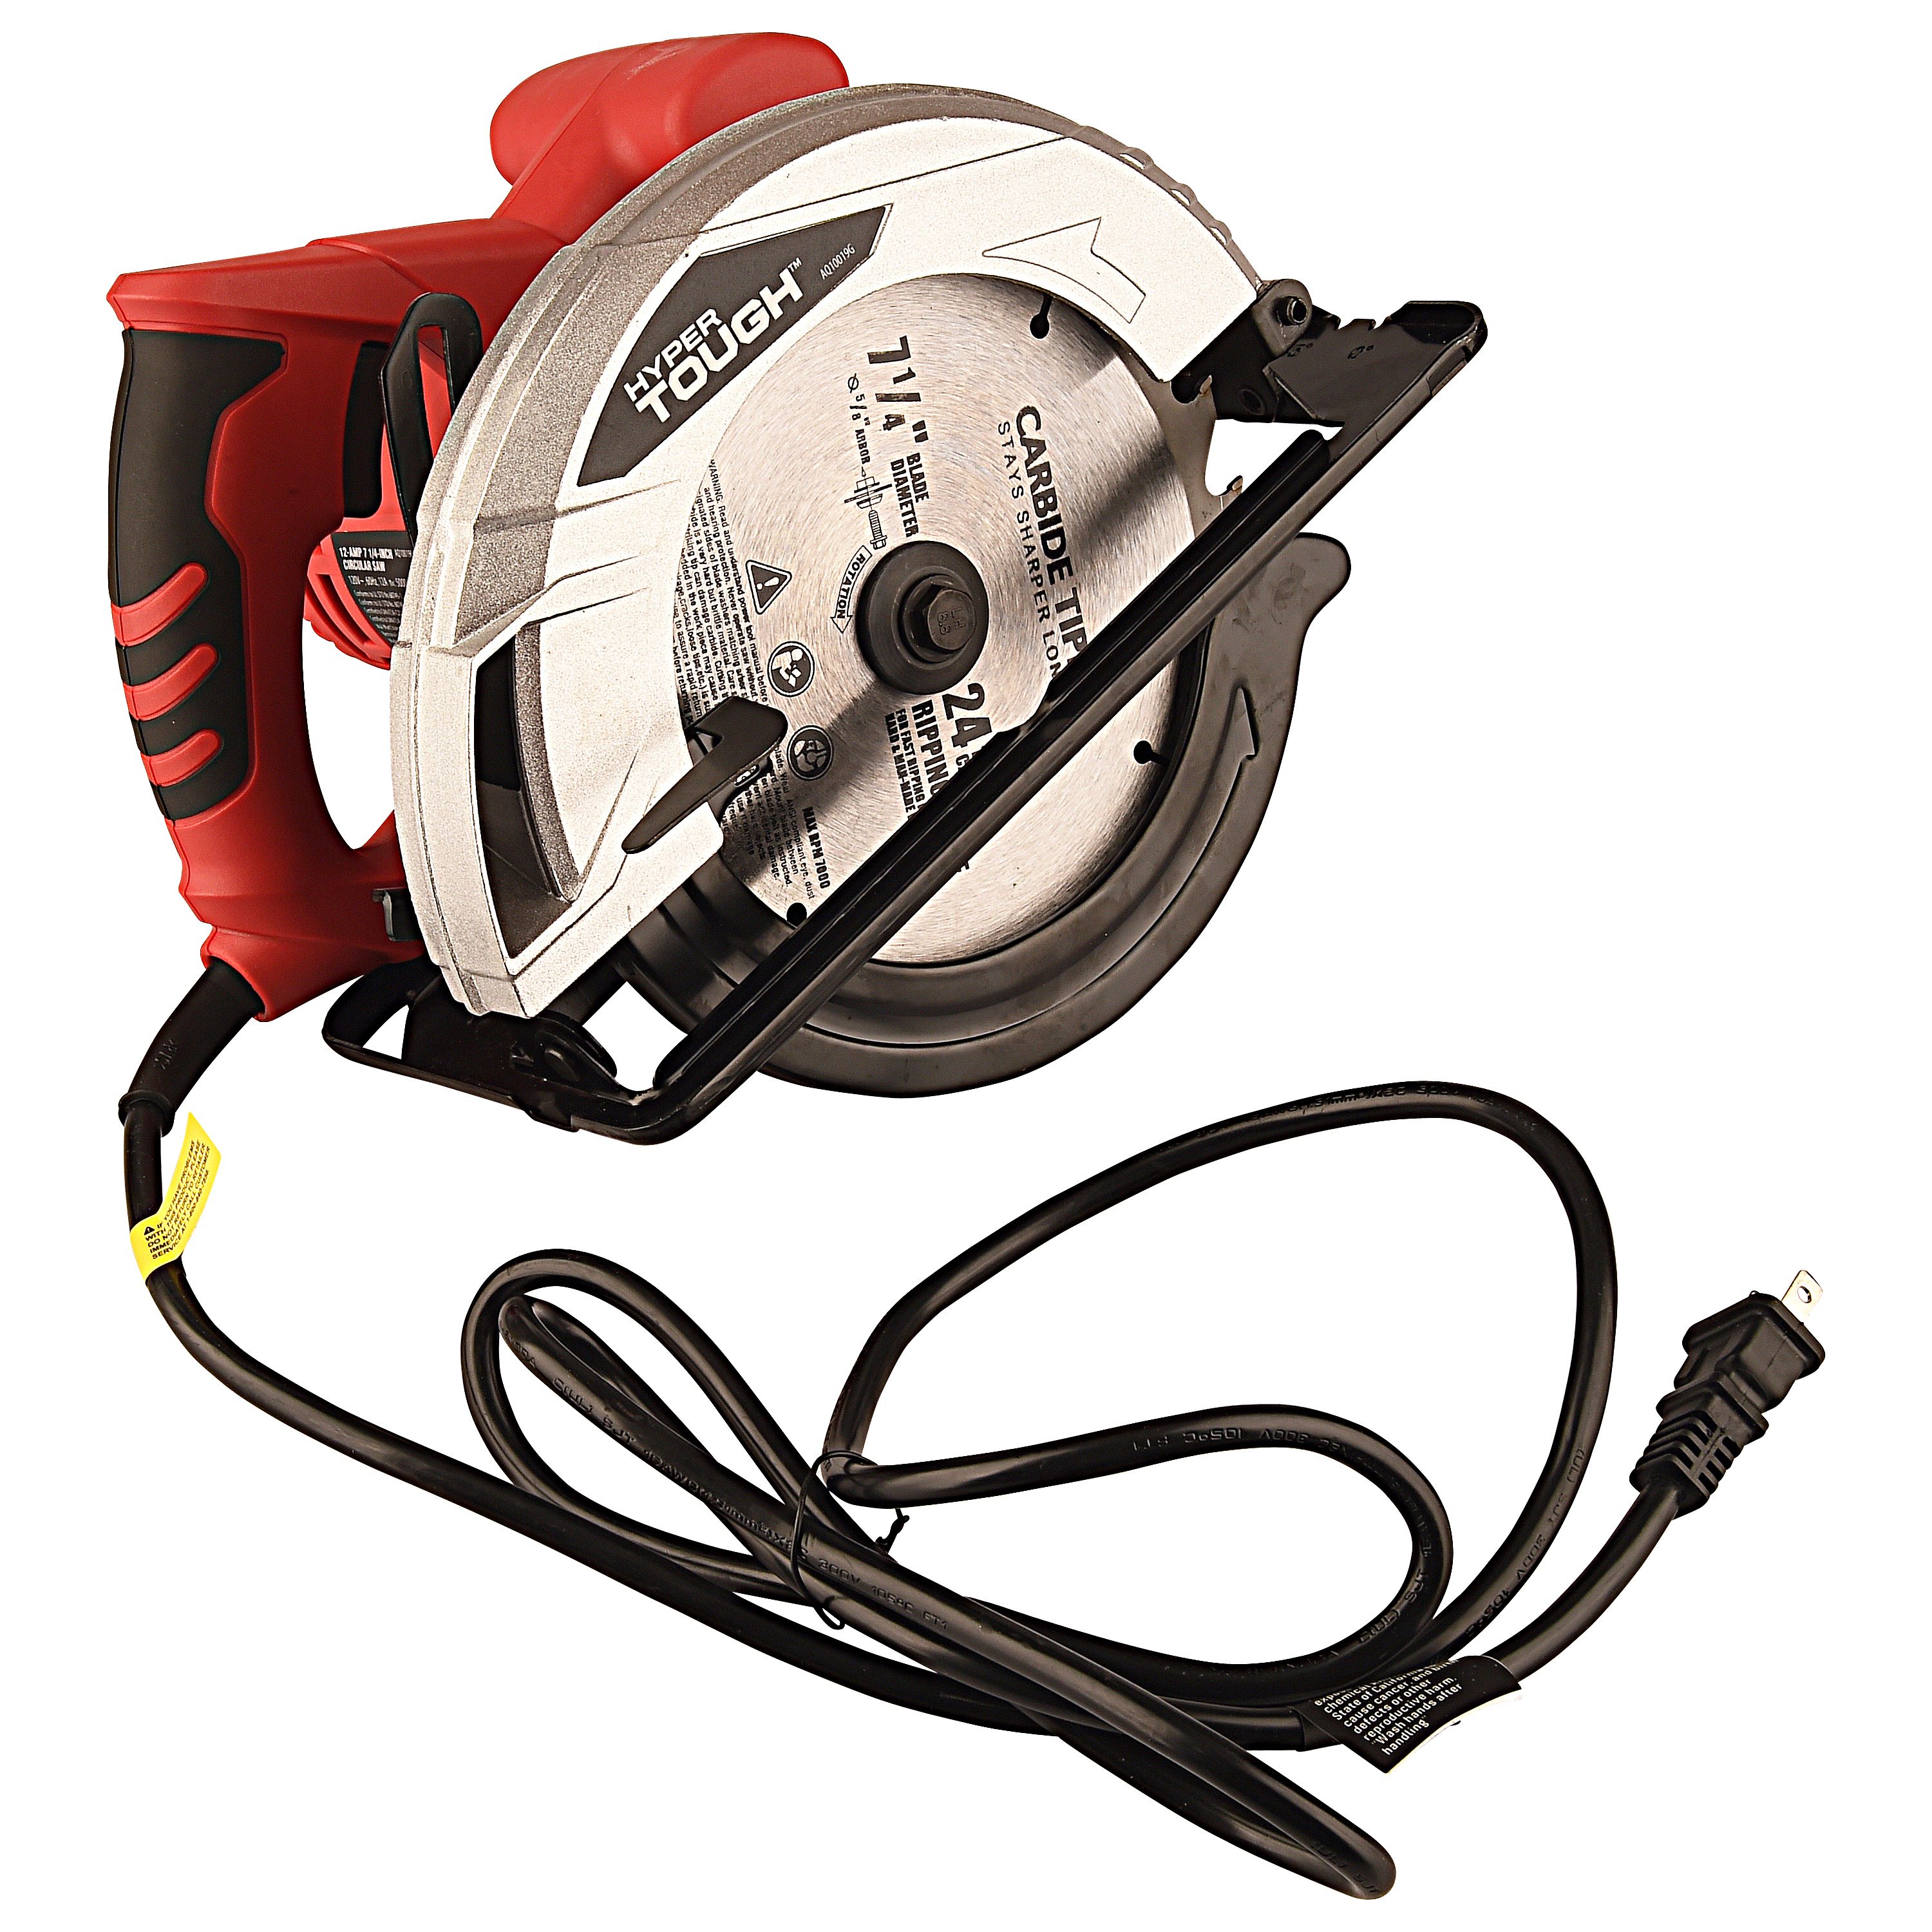 Hyper Tough 12 Amp Corded 7-1/4 inch Circular Saw with Steel Plate Shoe,  Adjustable Bevel, Blade  Rip Fence